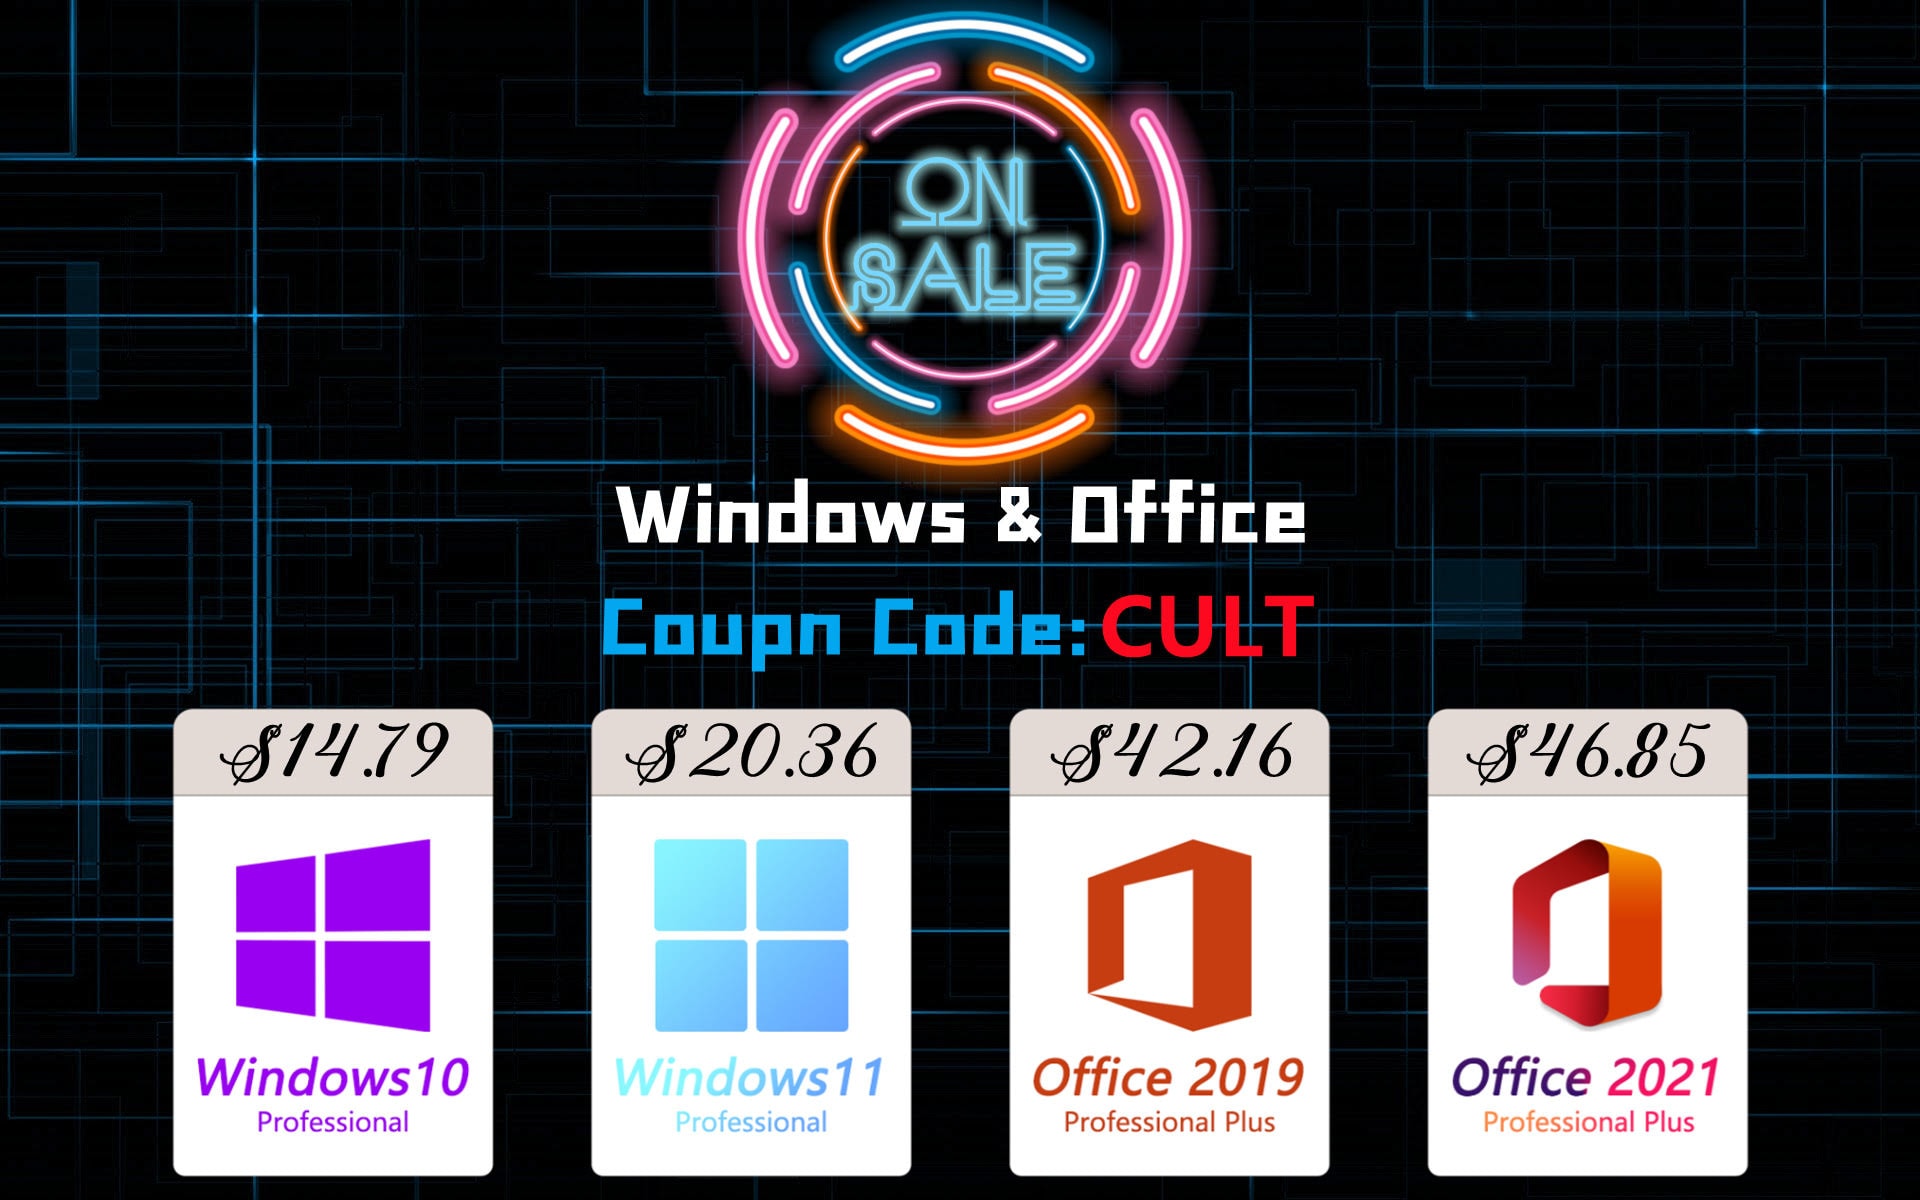 In CDKeylord's Flash Sale, you can get 35% off with coupon code CULT.